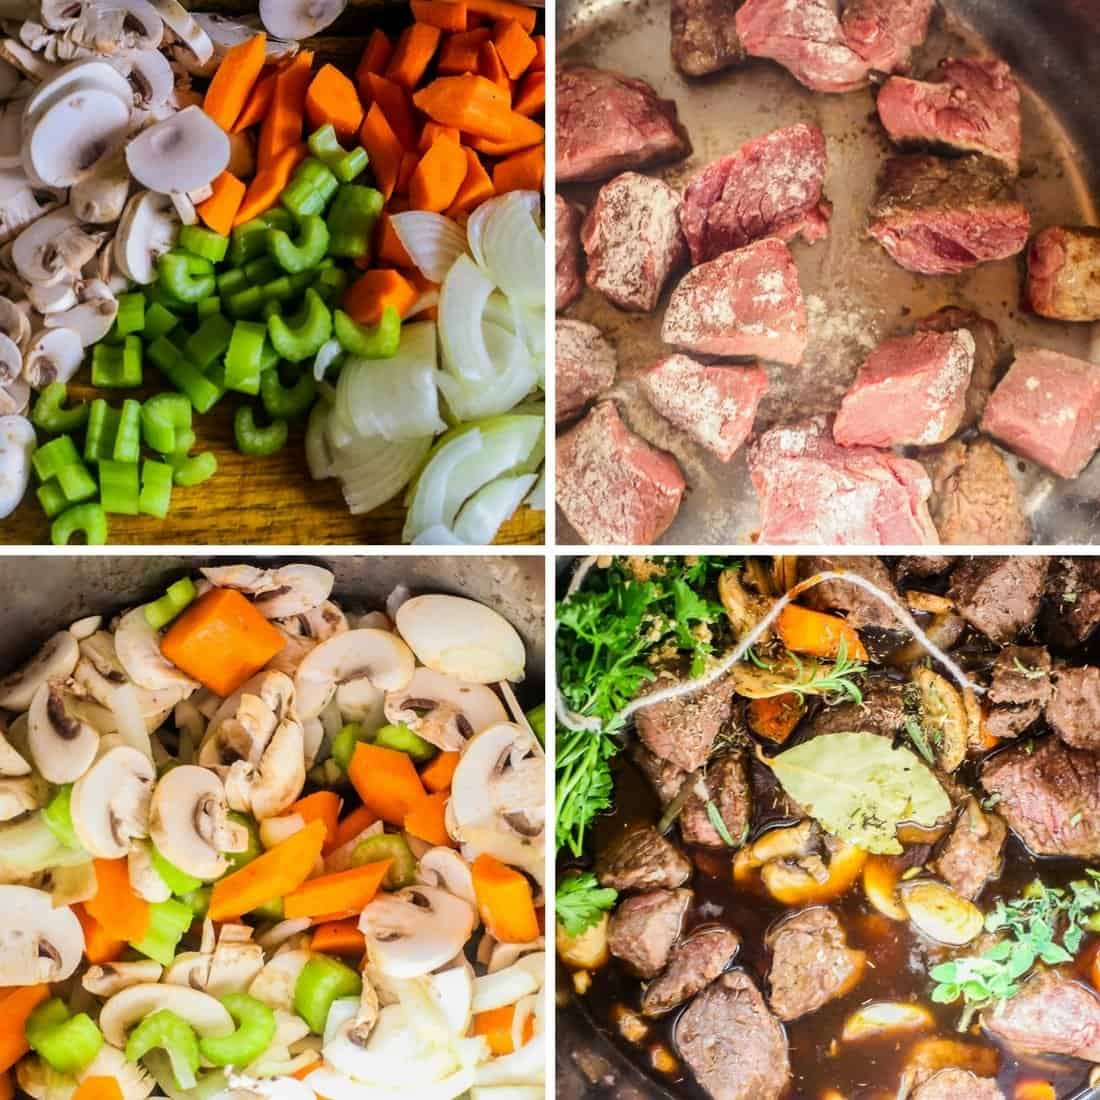 beef mushroom guinness soup is made with tasty veggies. The beef is browned and Guinness Stout is poured over the meat and veggies. The ingredients can be braised, slow cooked, or made in the Instant Pot.